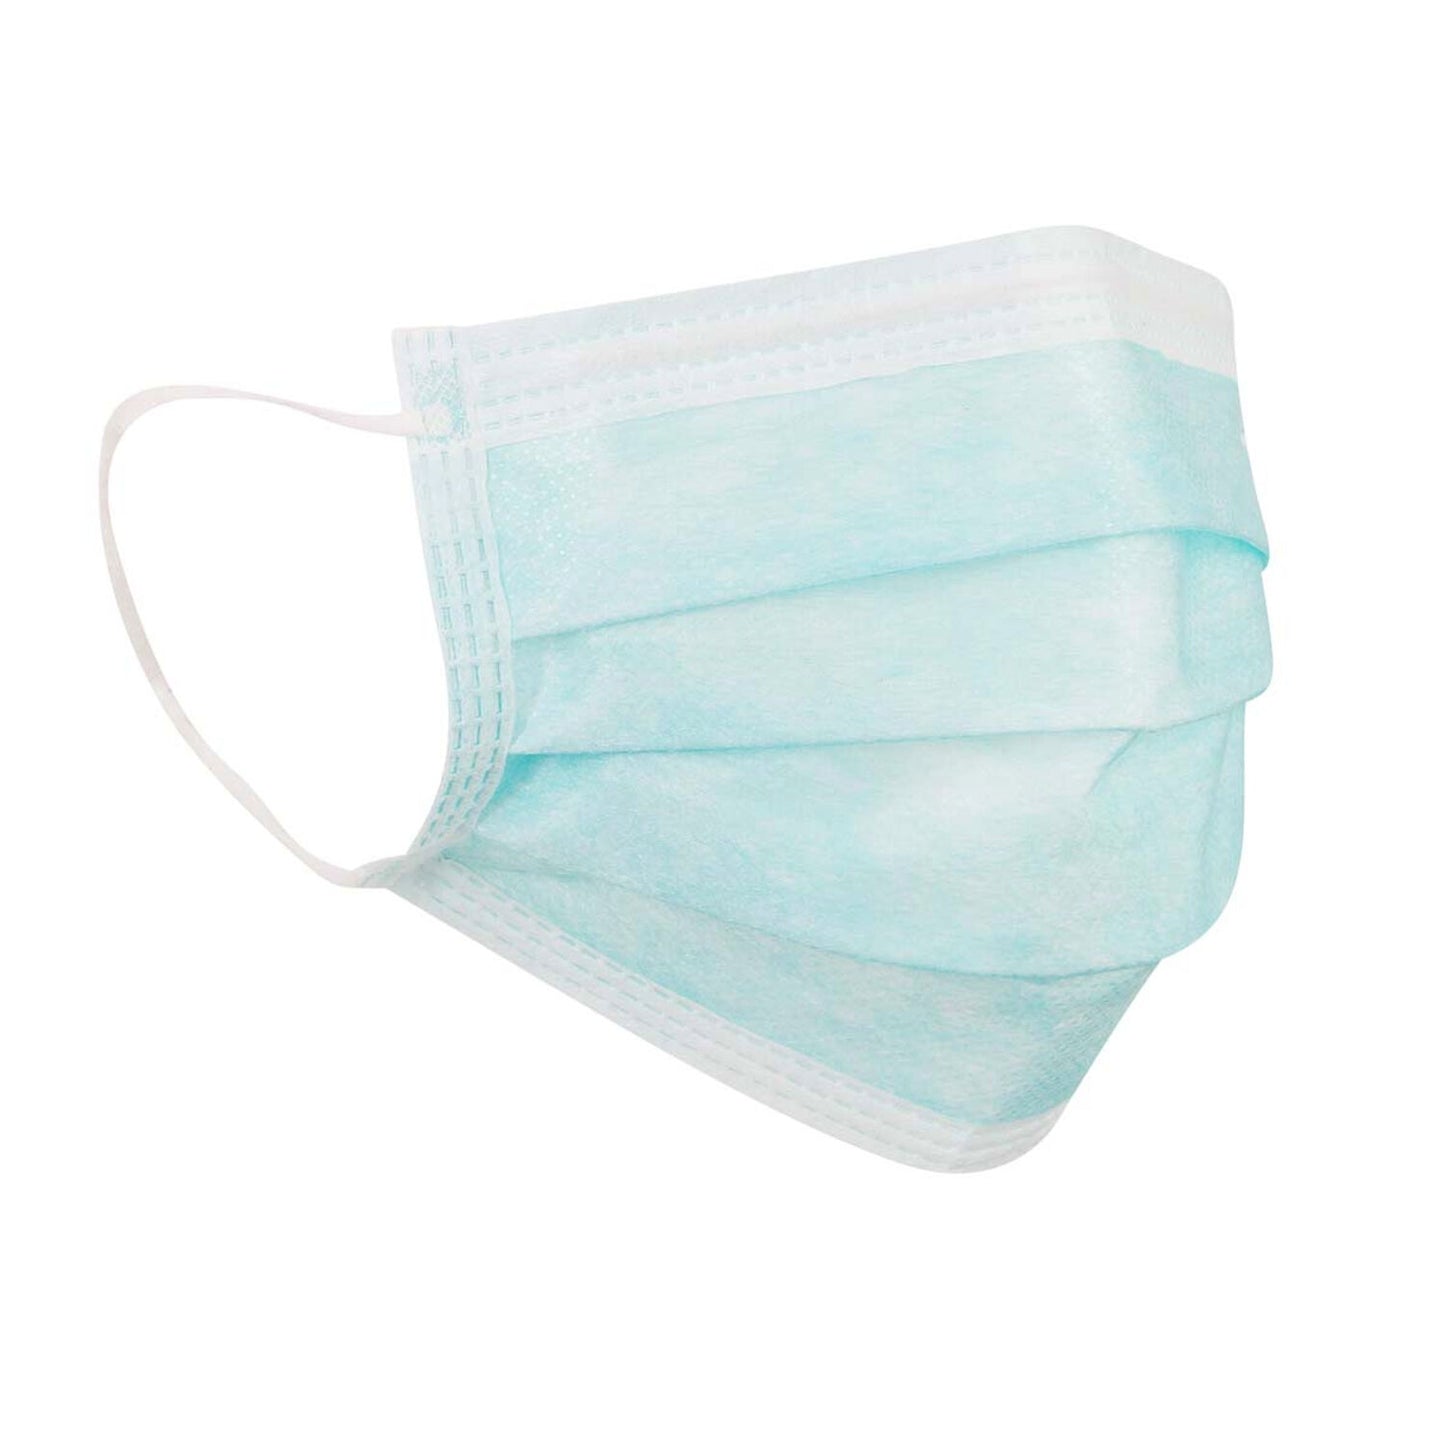 50 x Surgical Face Masks 3 Ply CE Approved